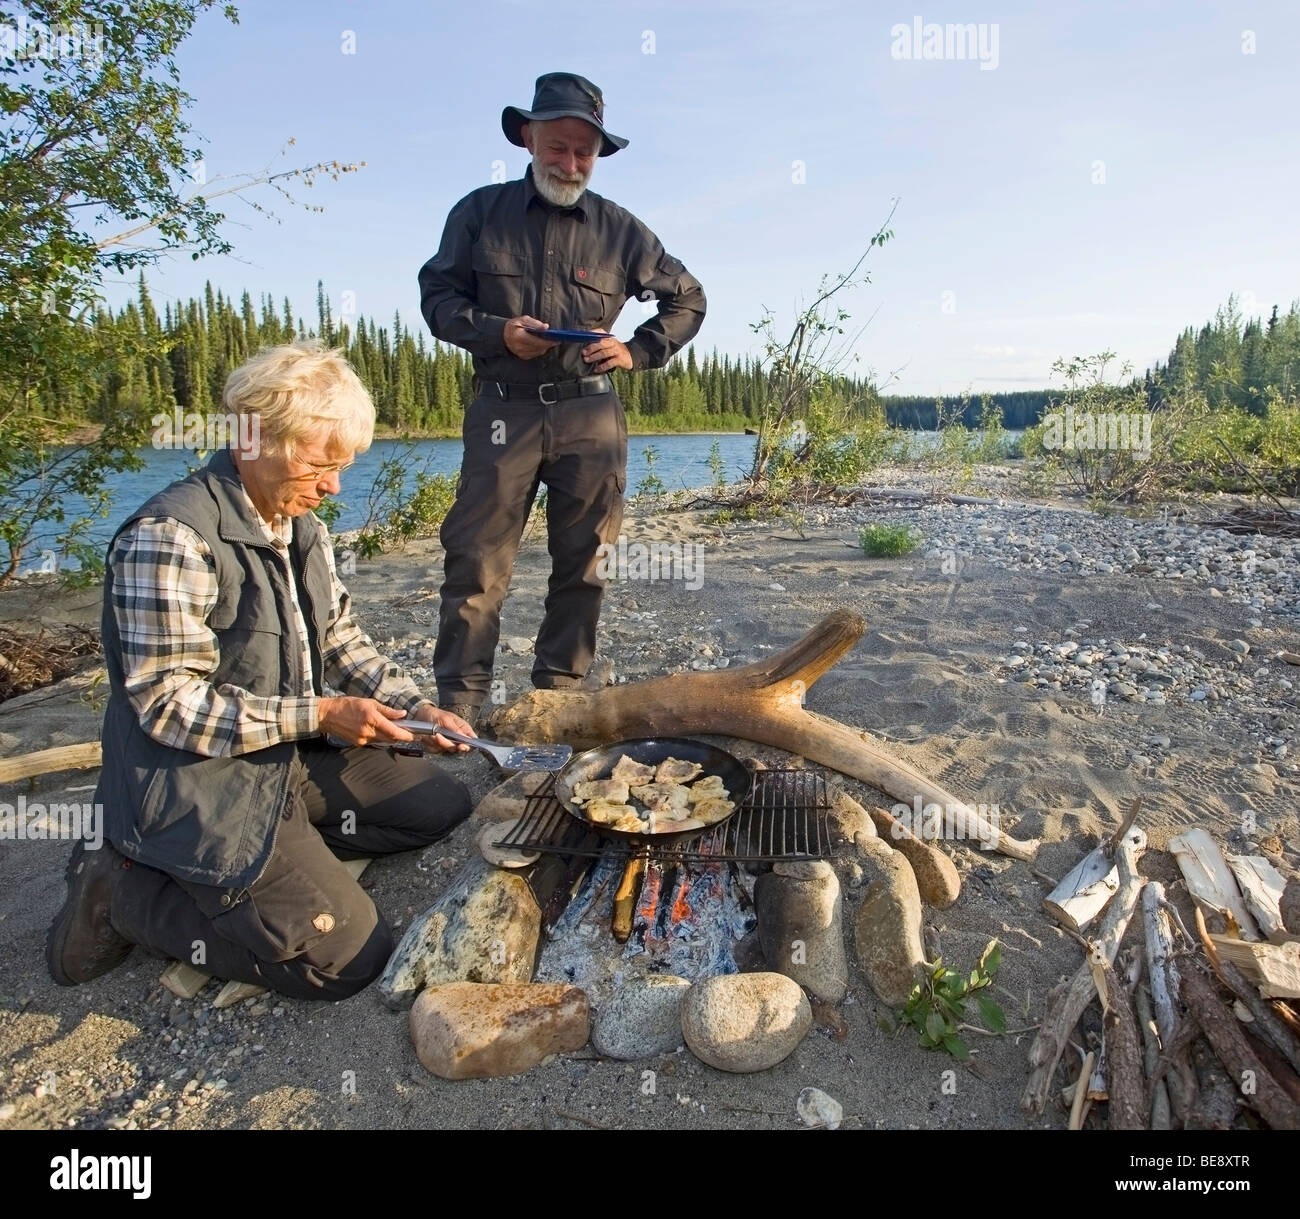 Woman cooking, frying fish fillets in a pan on a camp fire, man with plate waiting behind, upper Liard River, Yukon Territory,  Stock Photo